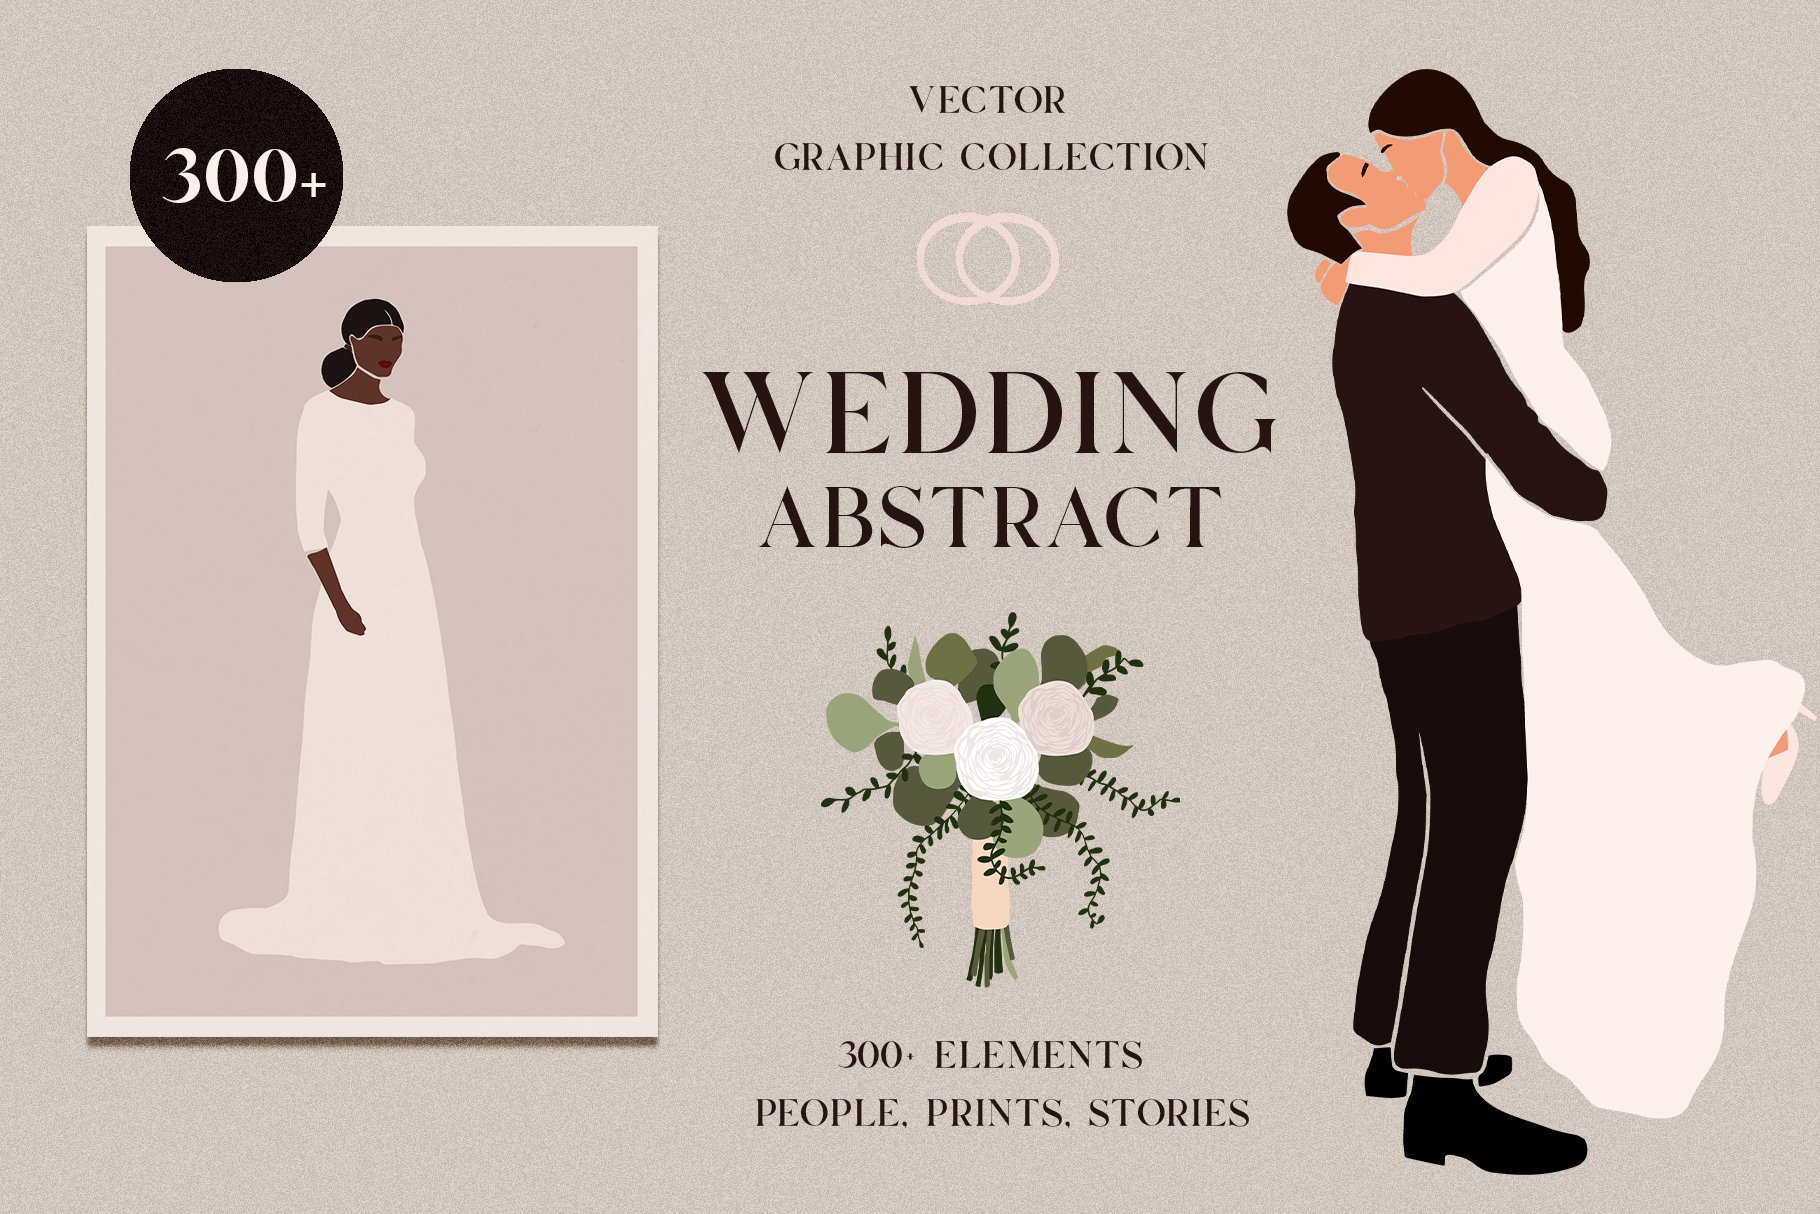 Wedding Abstract graphic collection cover image.